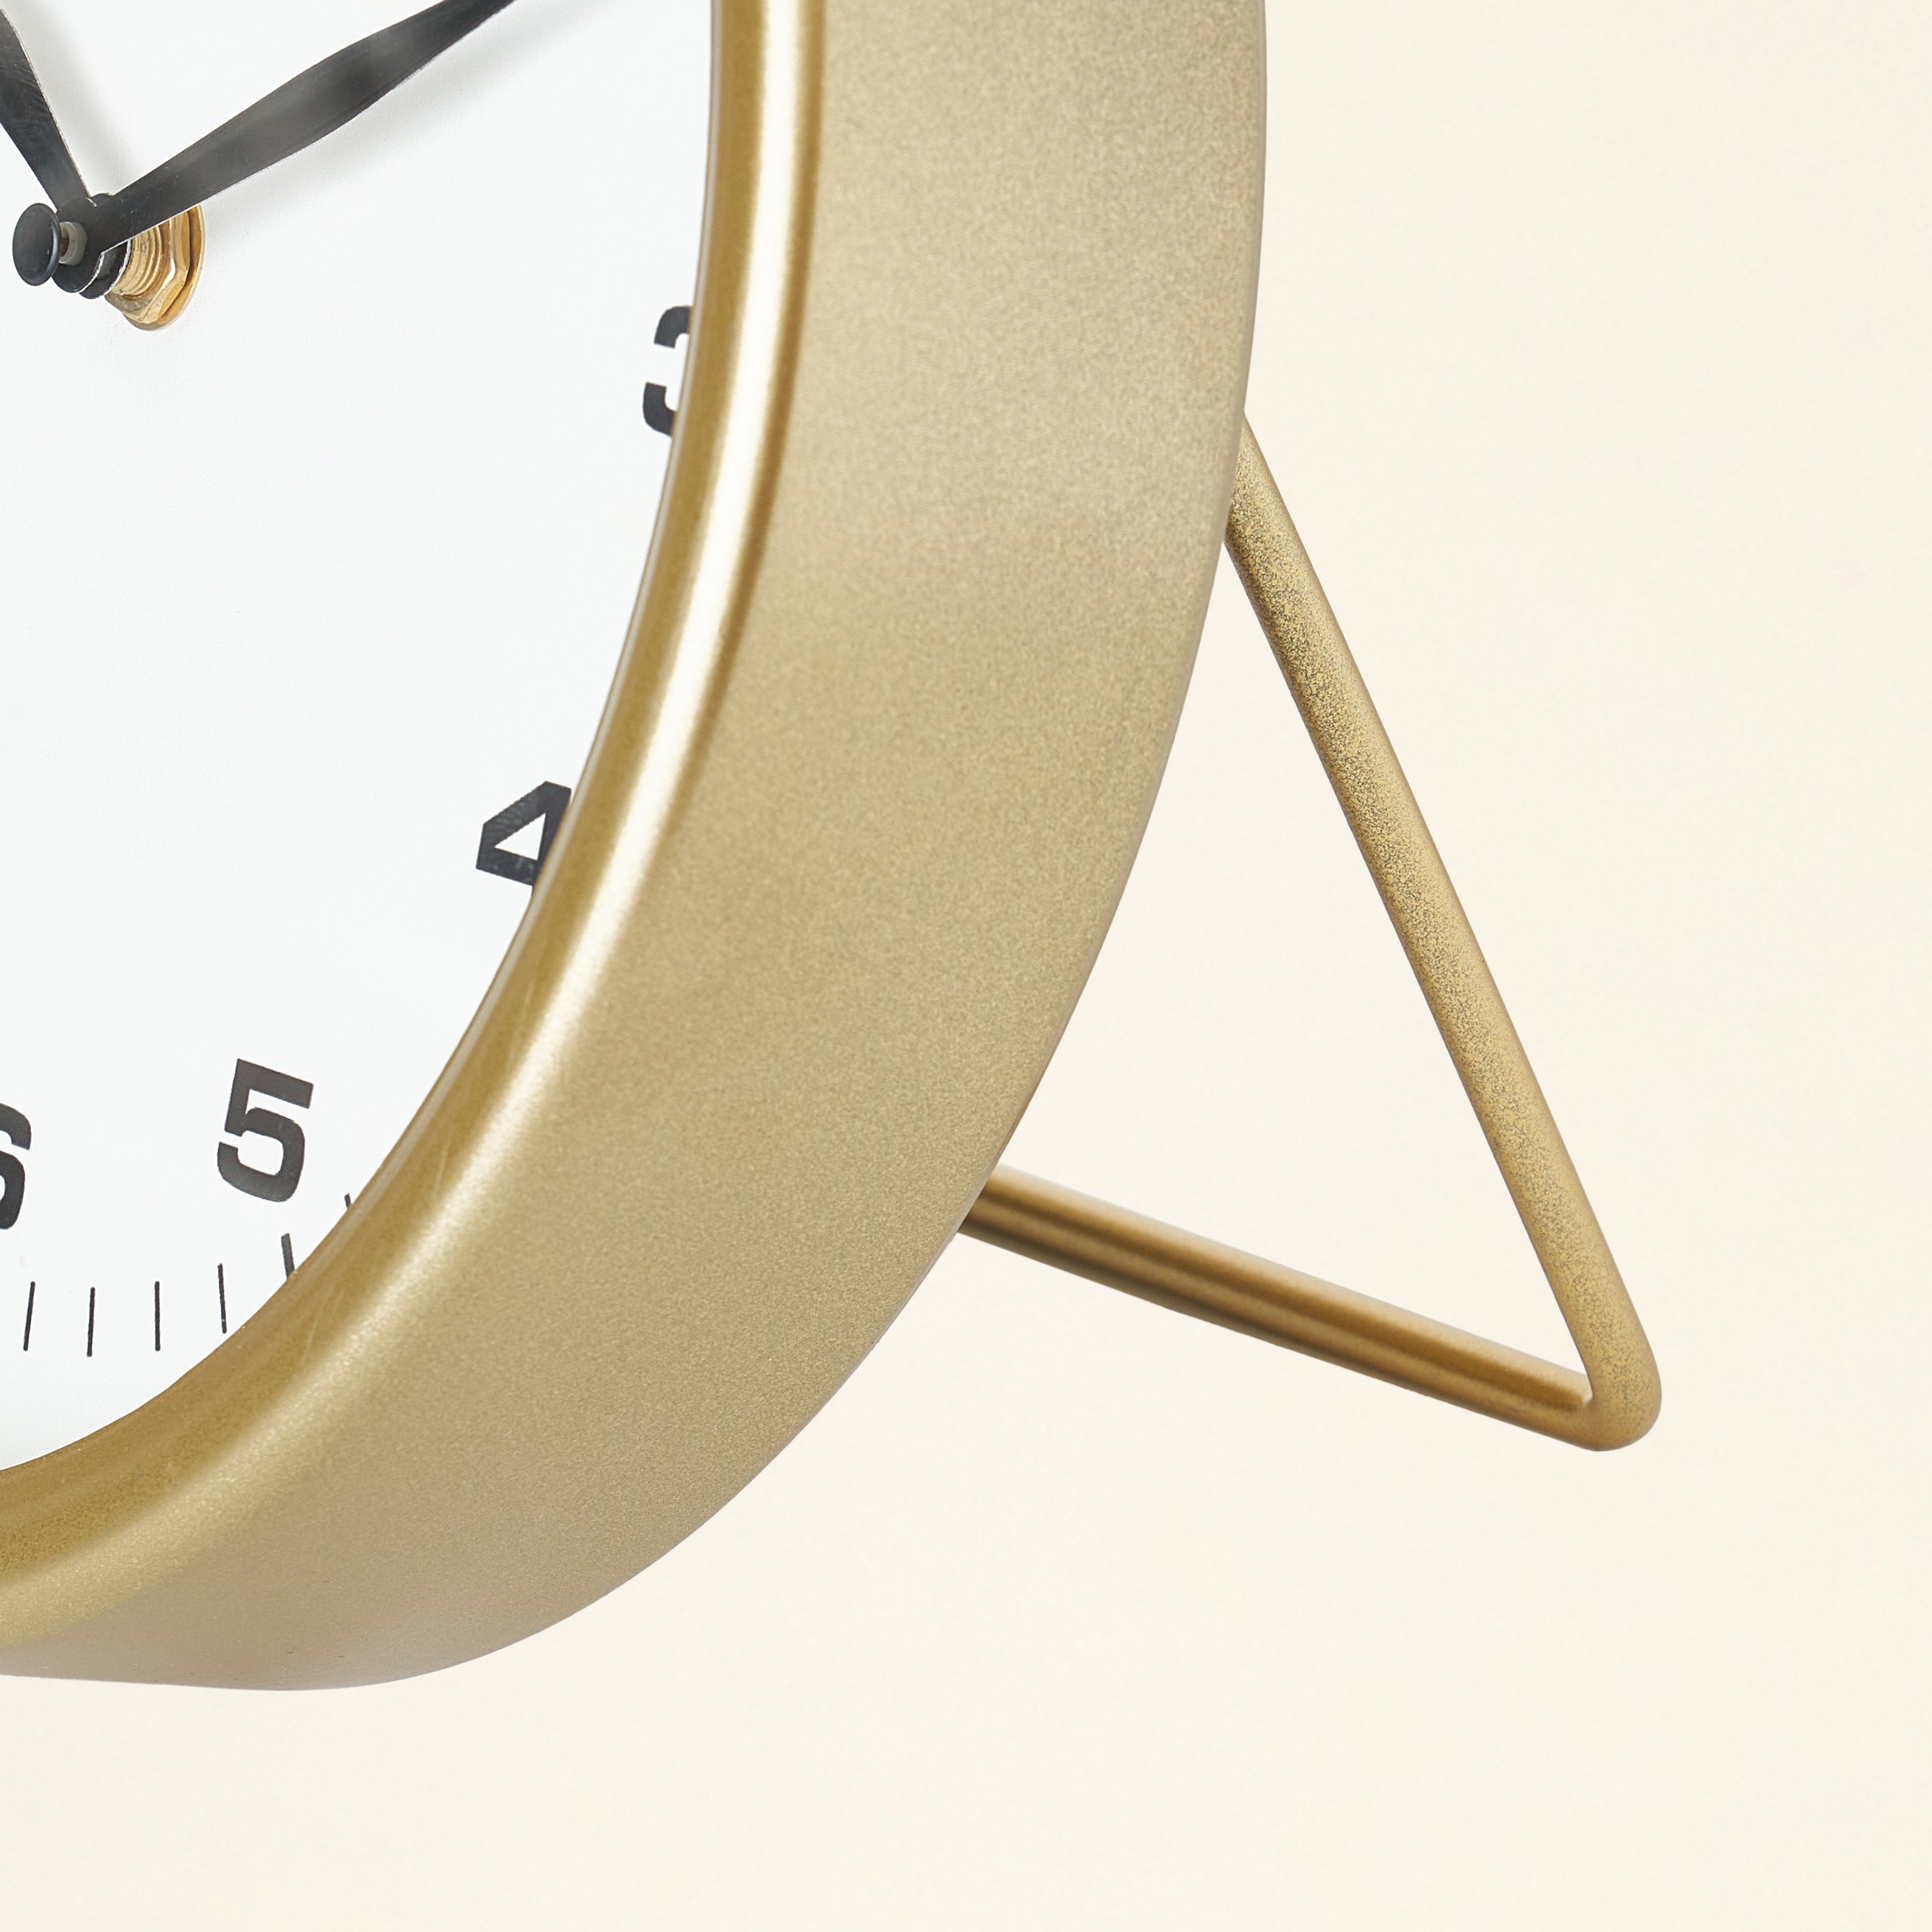 Brass Table Clock – KATE MARKER HOME